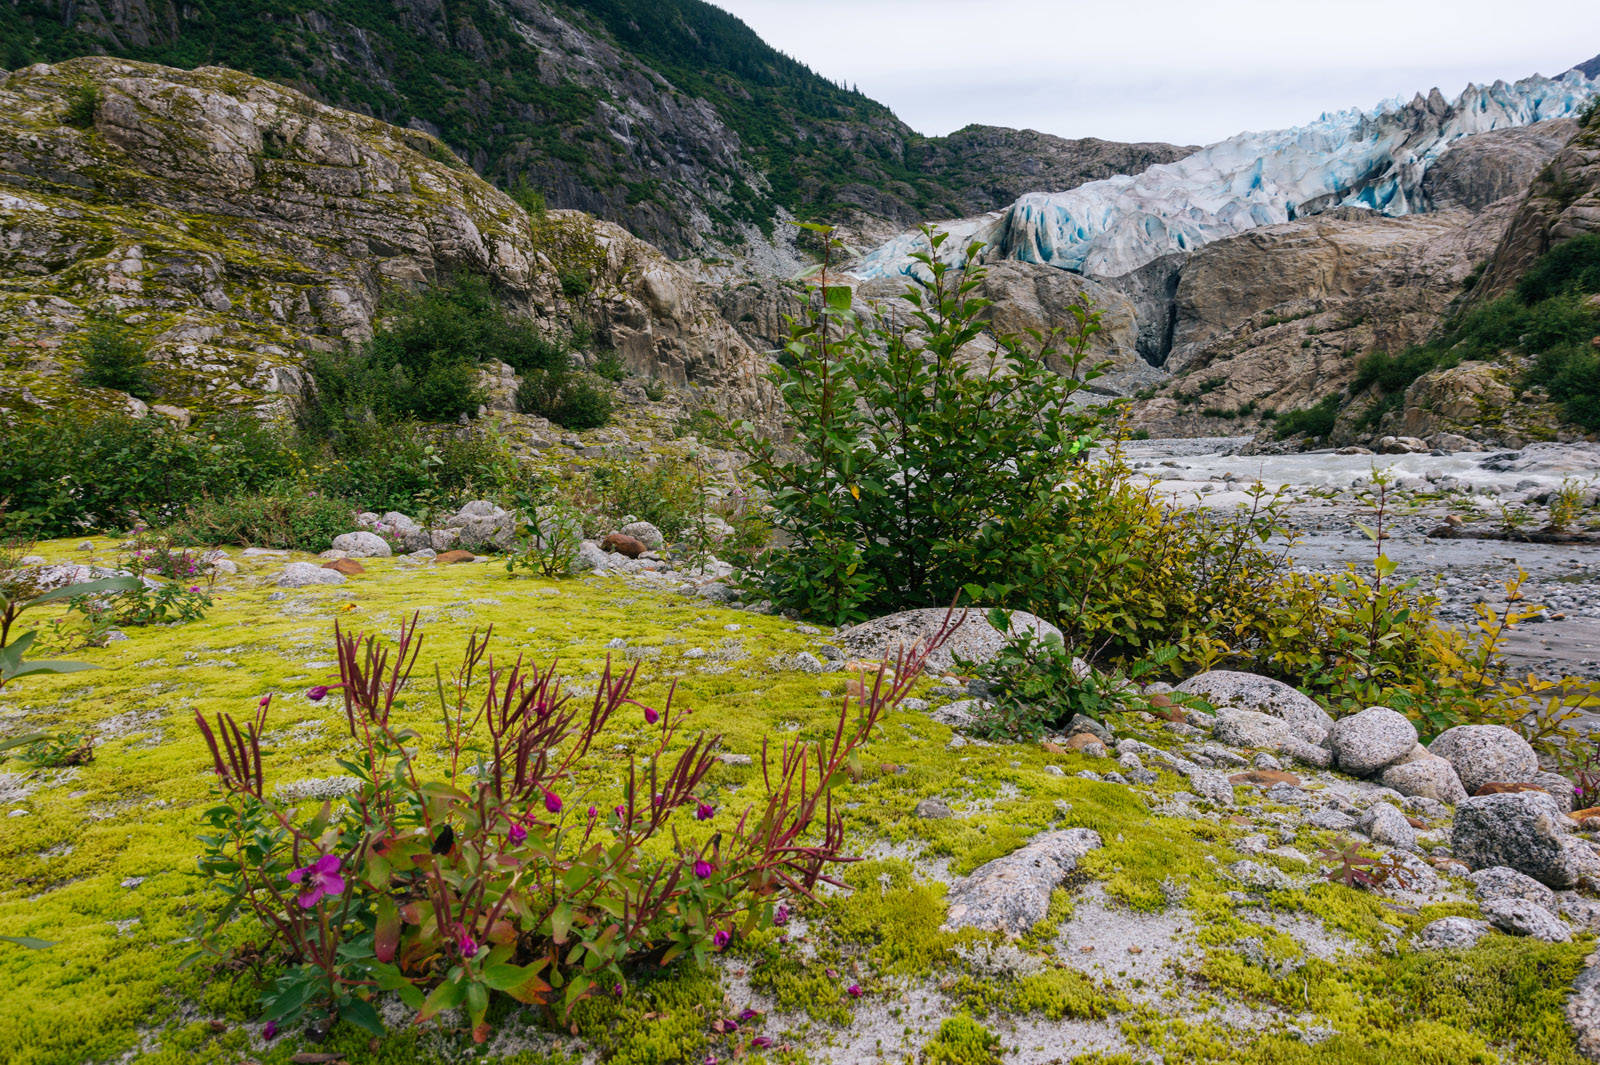 Primary succession at work on the recently uncovered earth. (Gabe Donohoe | For the Juneau Empire)